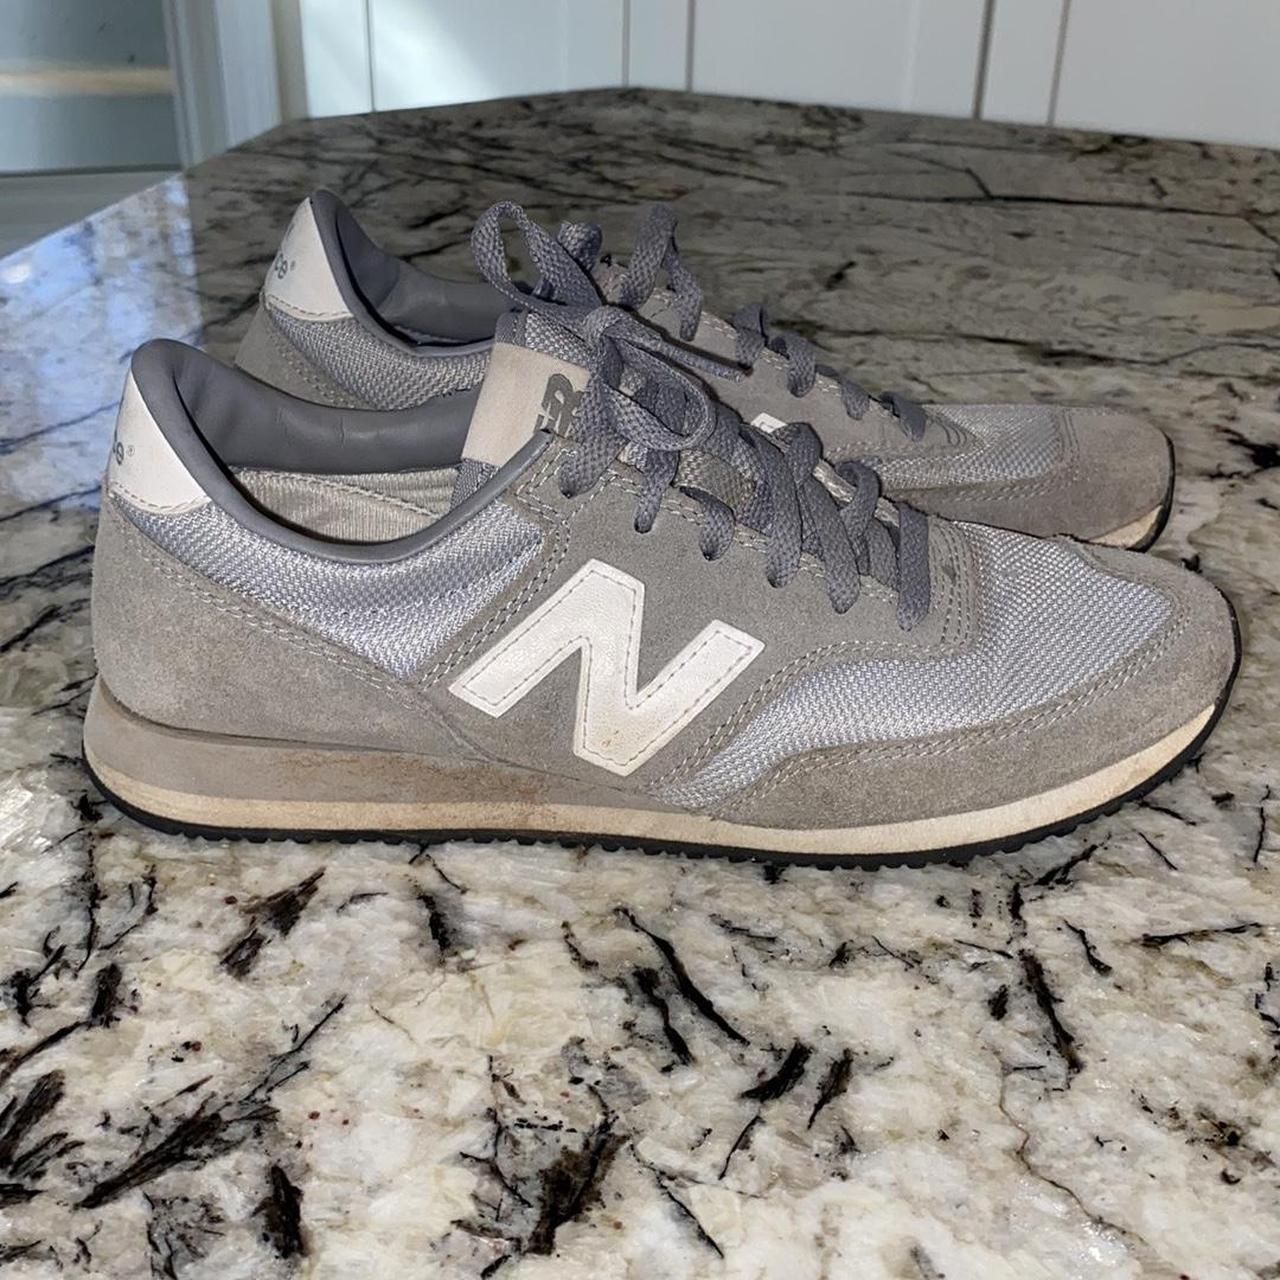 New Balance Women’s size 8 In good condition - Depop